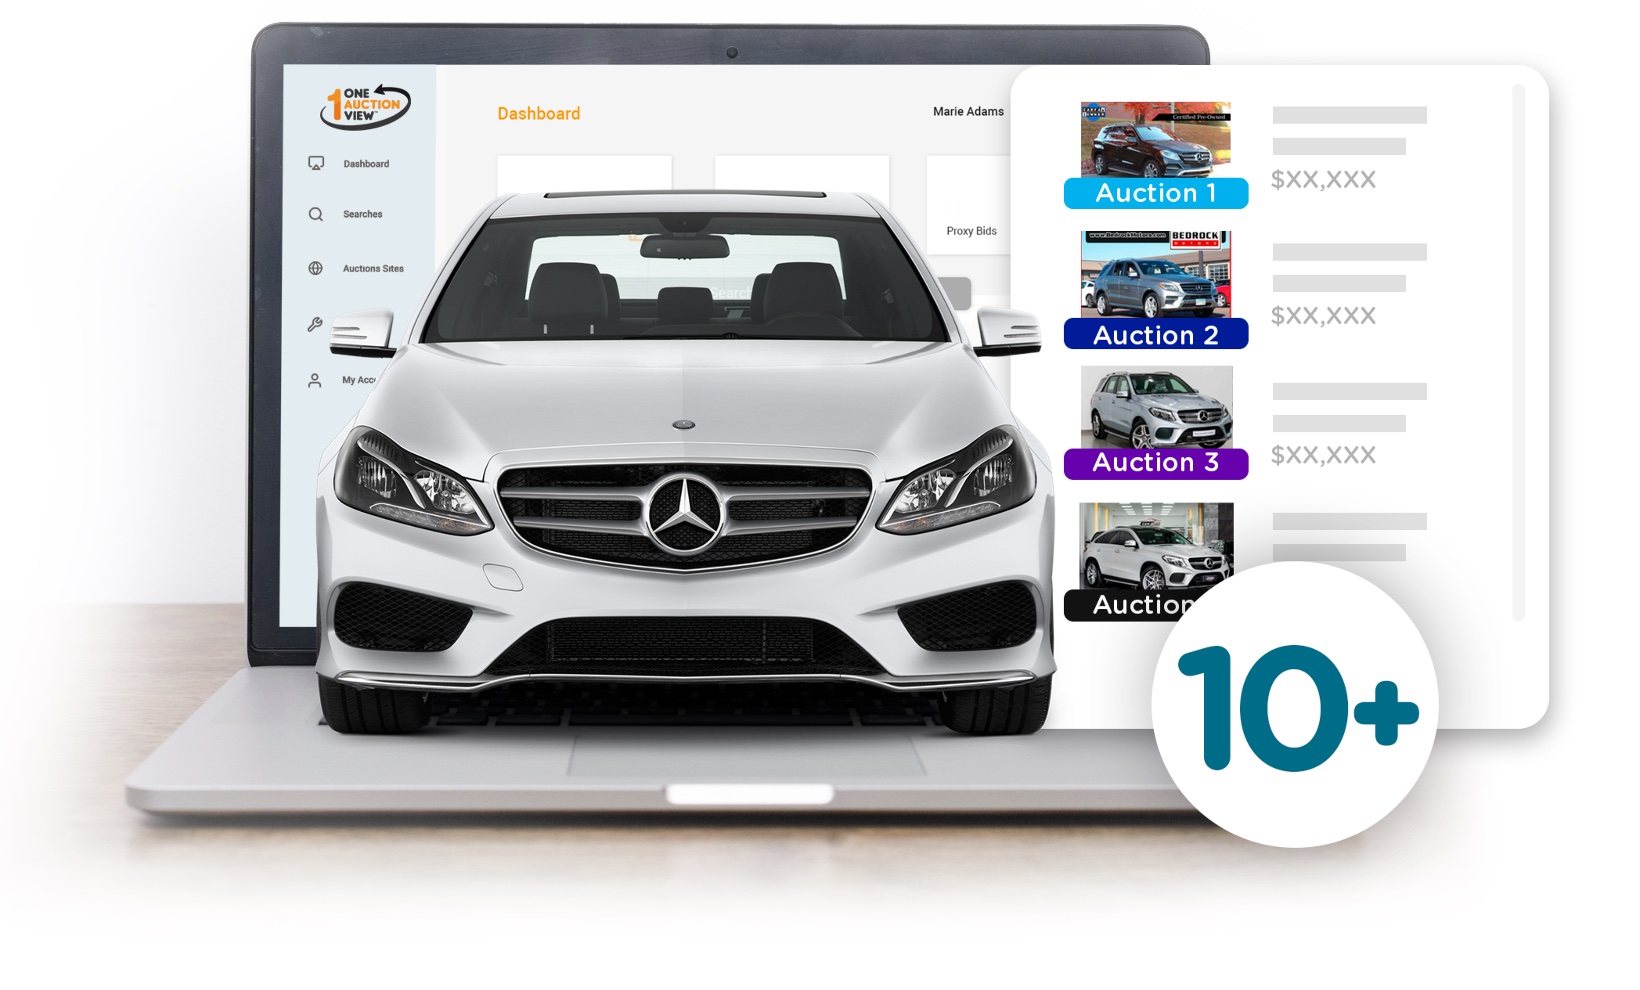 CAR AUCTION SITES on one screen